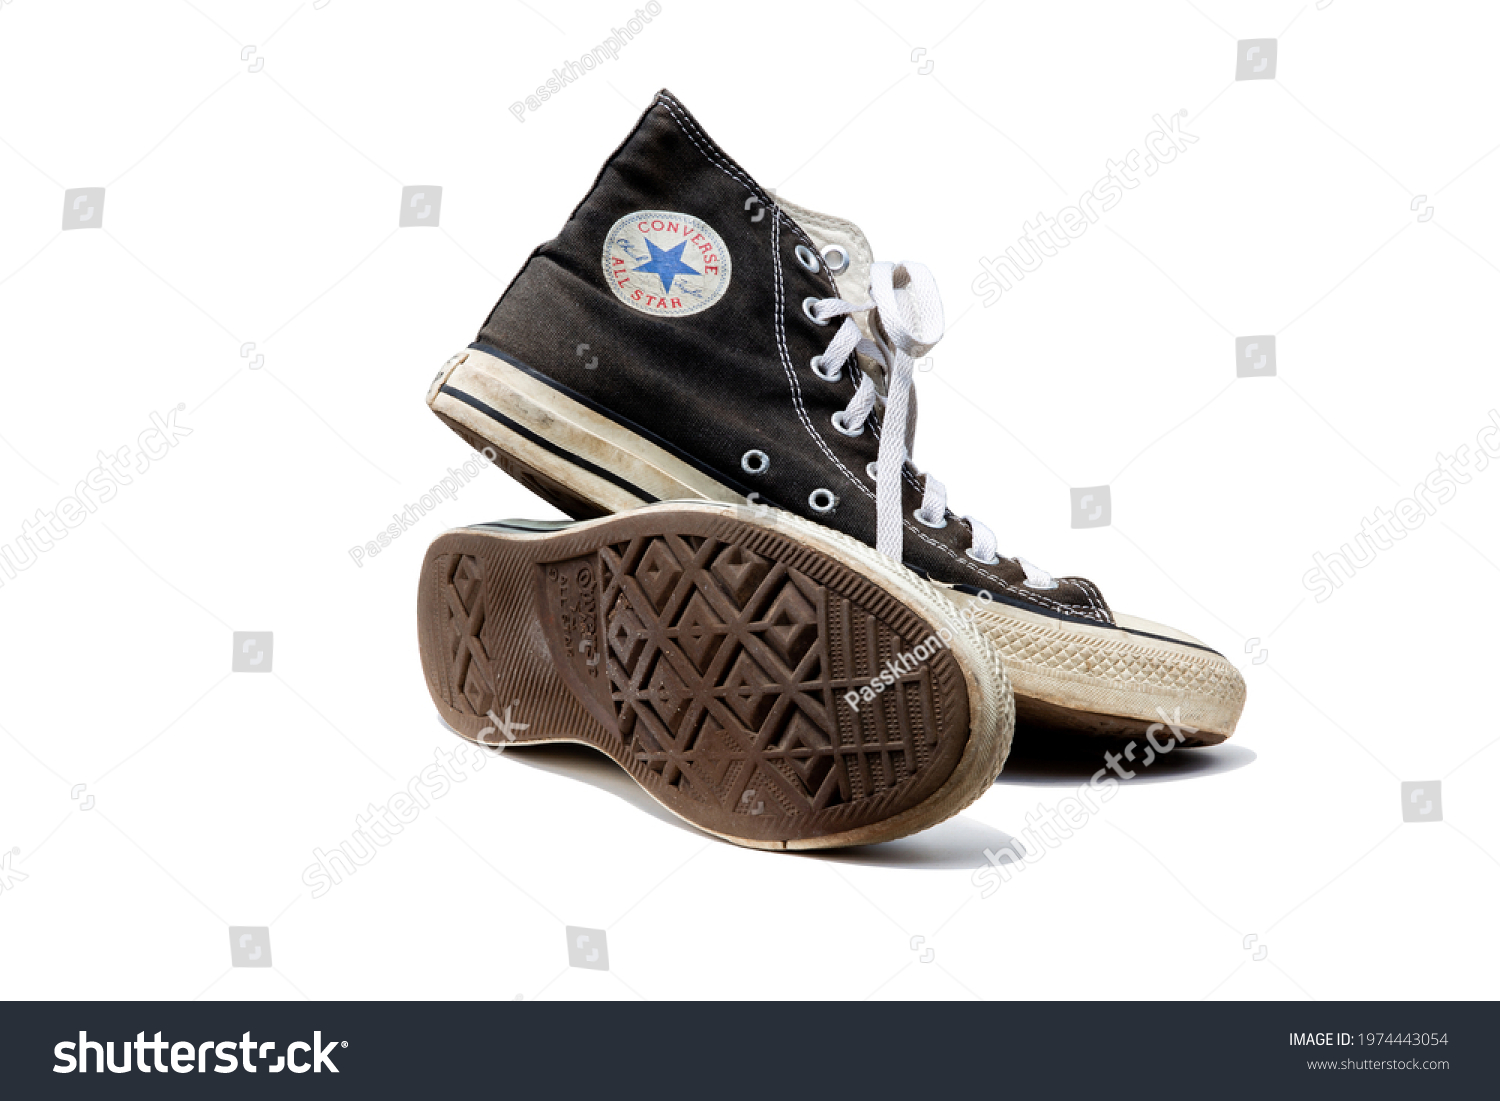 1,471 Logo old shoes Stock Photos, Images & Photography | Shutterstock